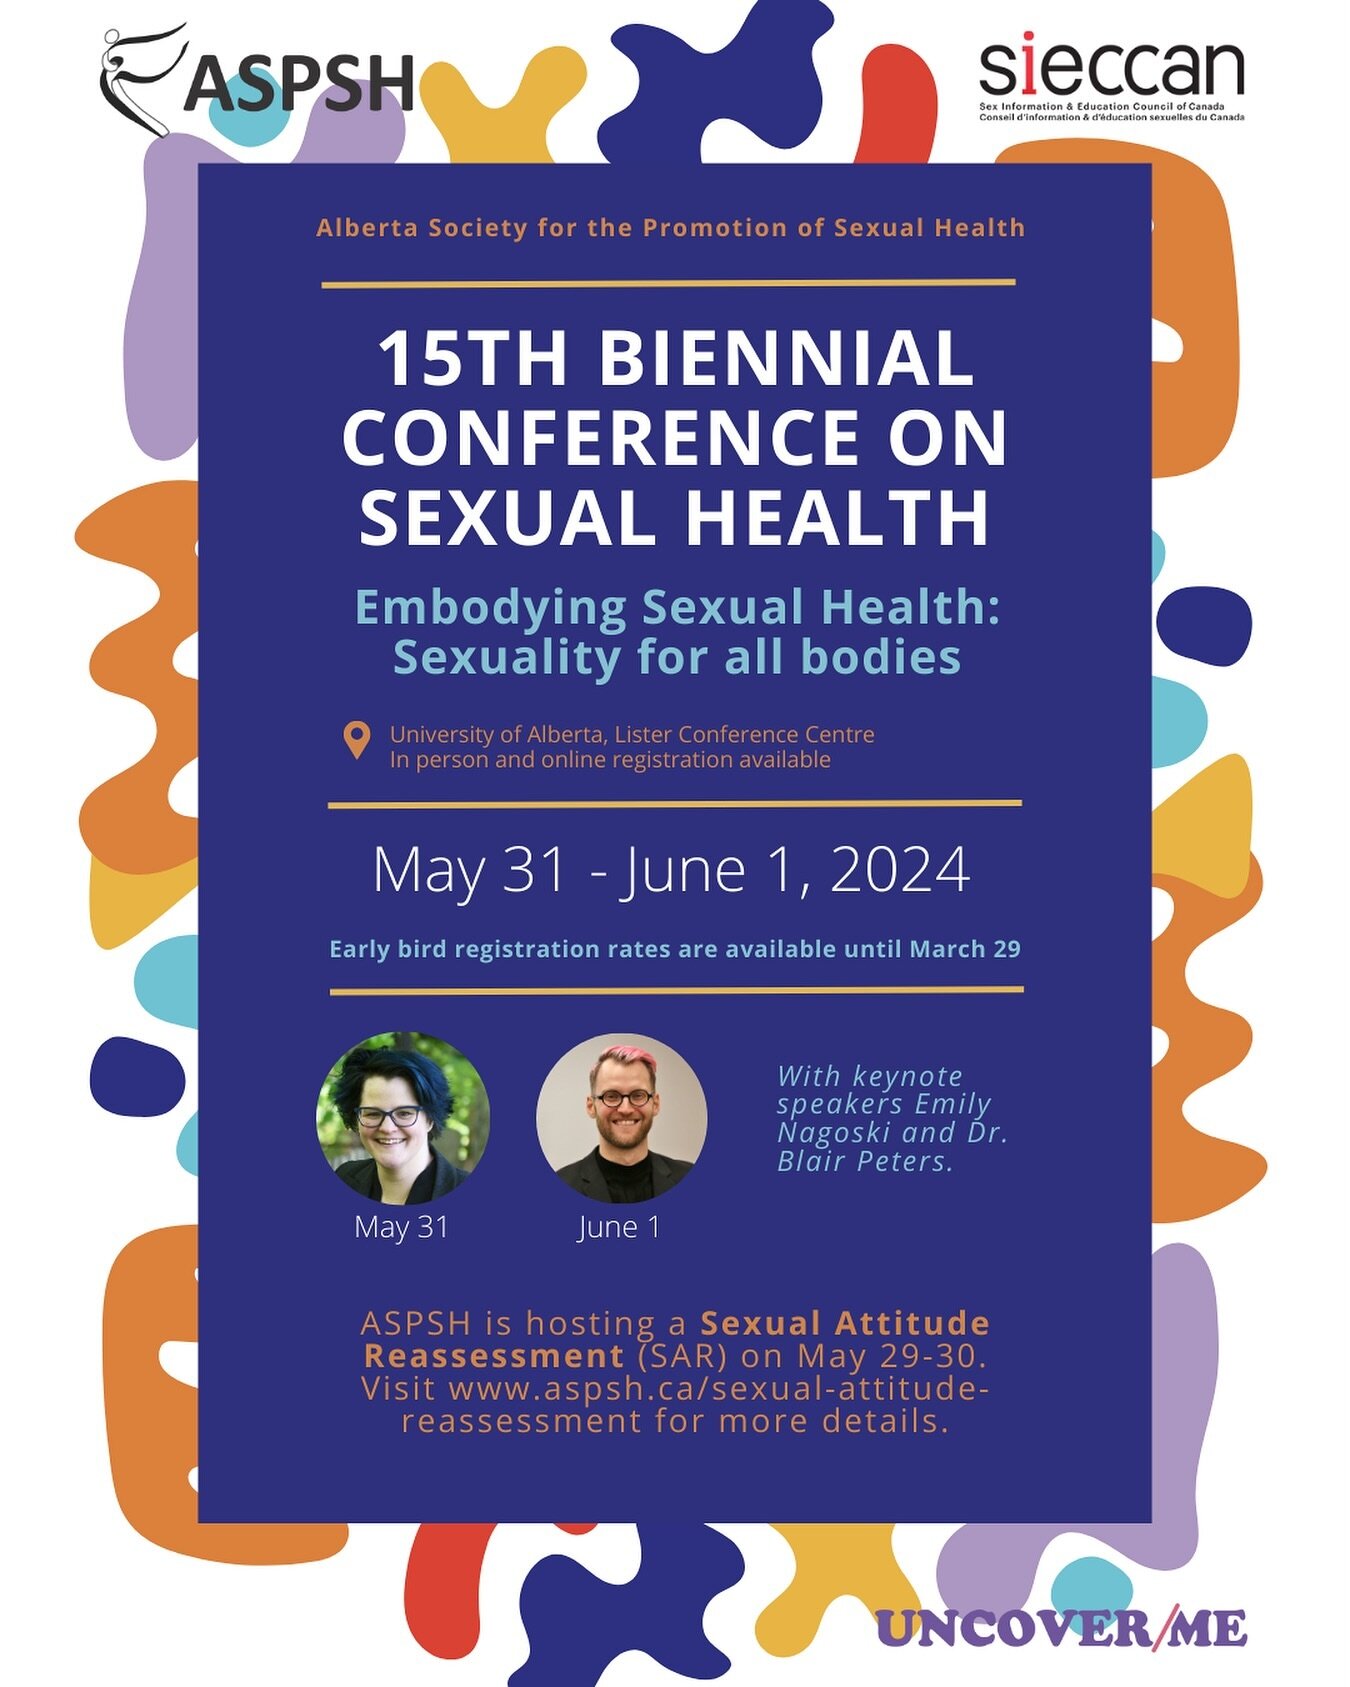 ASPSH&rsquo;s 15th biennial conference, Embodying Sexual Health: Sexuality for all bodies, is coming up on May 31 and June 1!

Right now you can find early bird registration and accommodation information on our website, www.aspsh.ca. A full conferenc